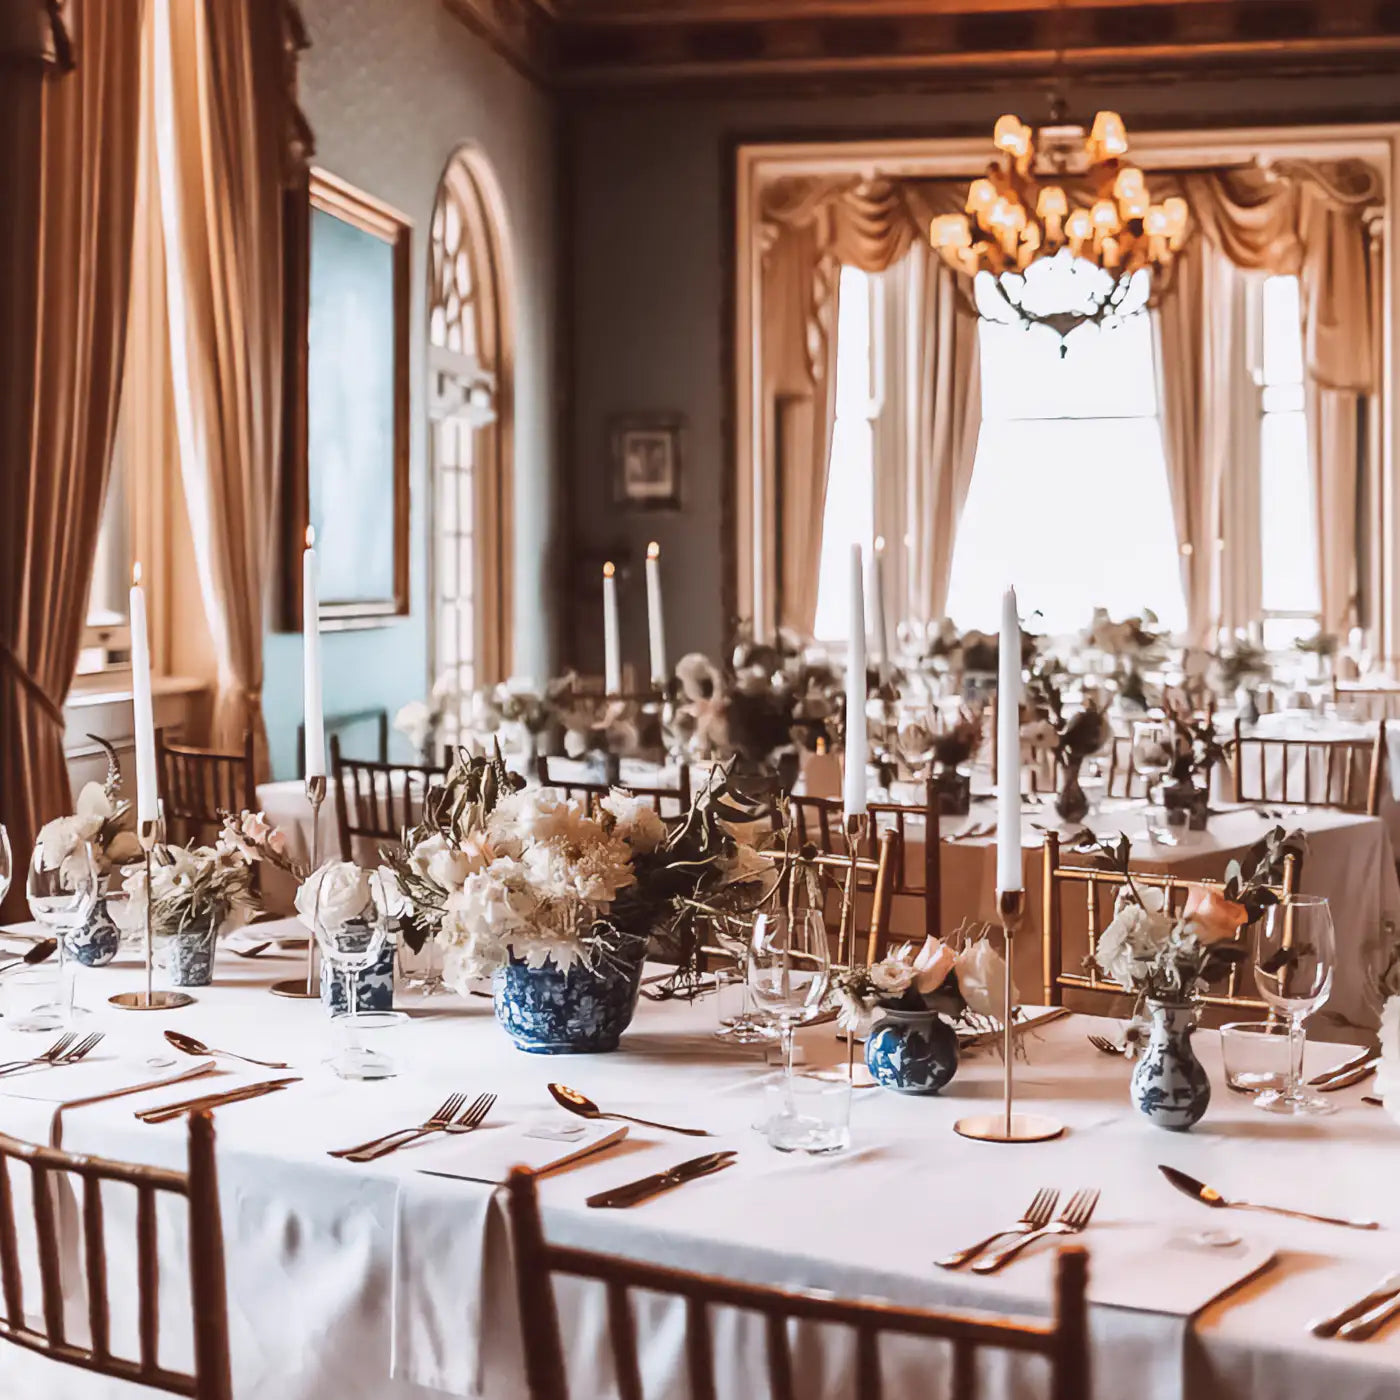 Elegant event setup in a grand hall with long tables draped in white linen, adorned with blue and white floral centrepieces and tall candlesticks, surrounded by golden chairs under ornate chandeliers. Fabulous Flowers and Gifts.